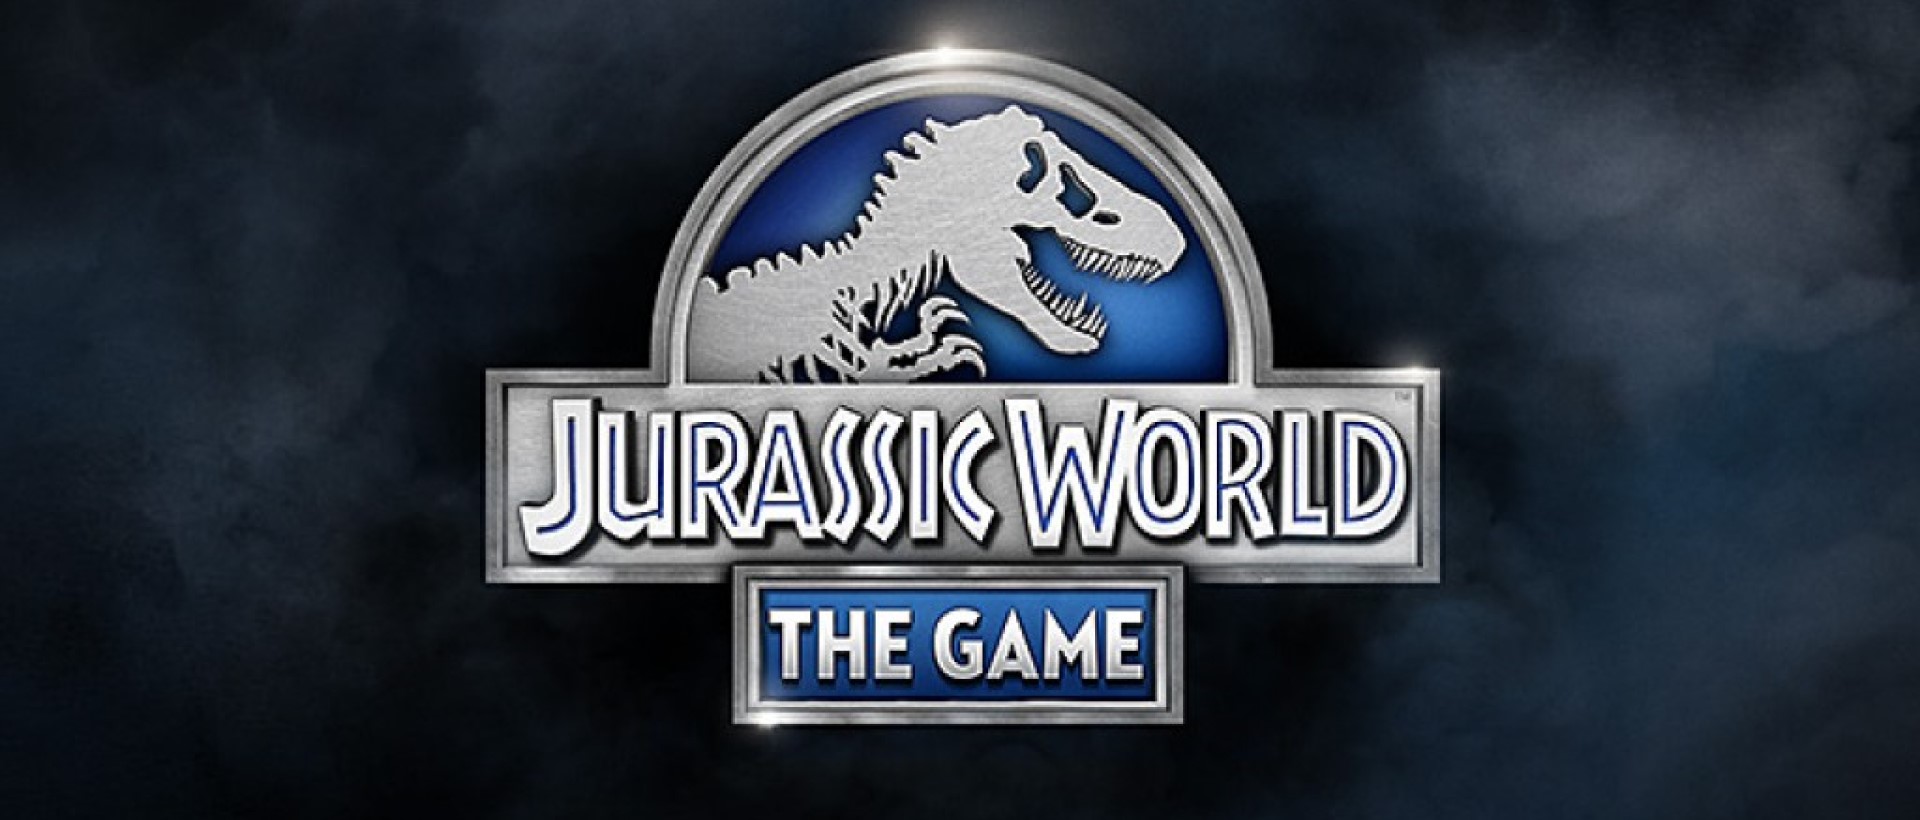 Download & Play Jurassic World™: The Game on PC & Mac with NoxPlayer (Emulator)